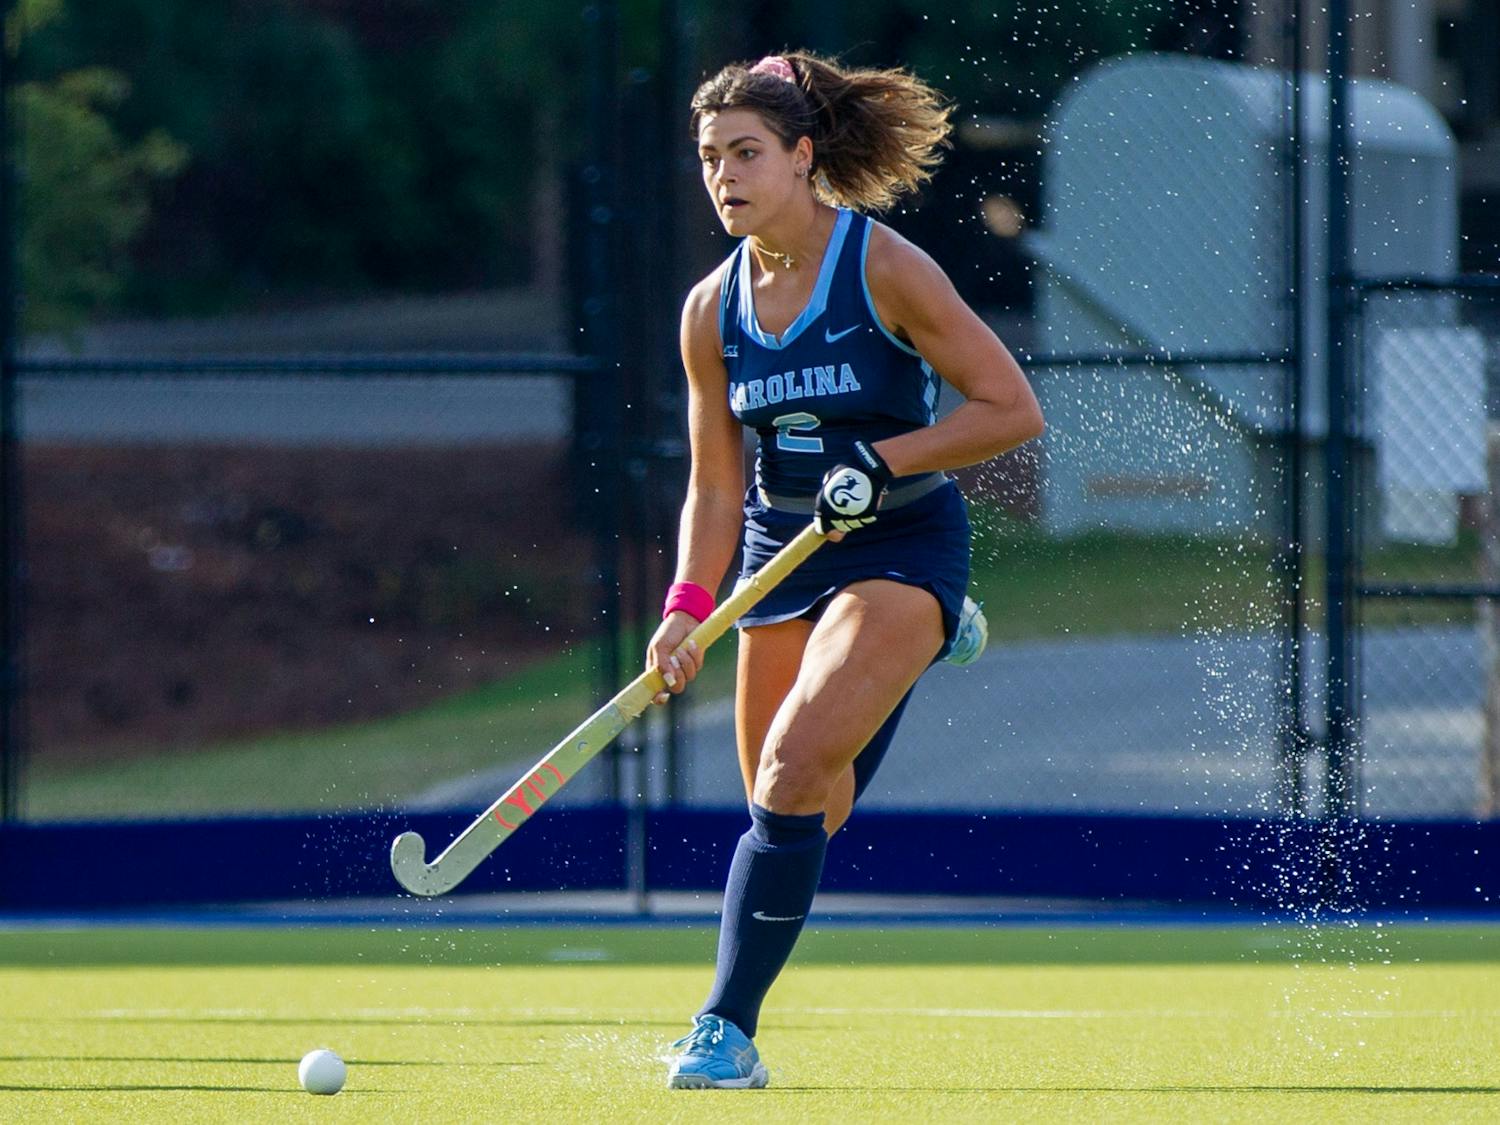 Senior forward Meredith Sholder (2) runs with the ball at the field hockey game against Louisville on Oct. 22 at the Karen Shelton Stadium. UNC lost 2-3 in overtime.